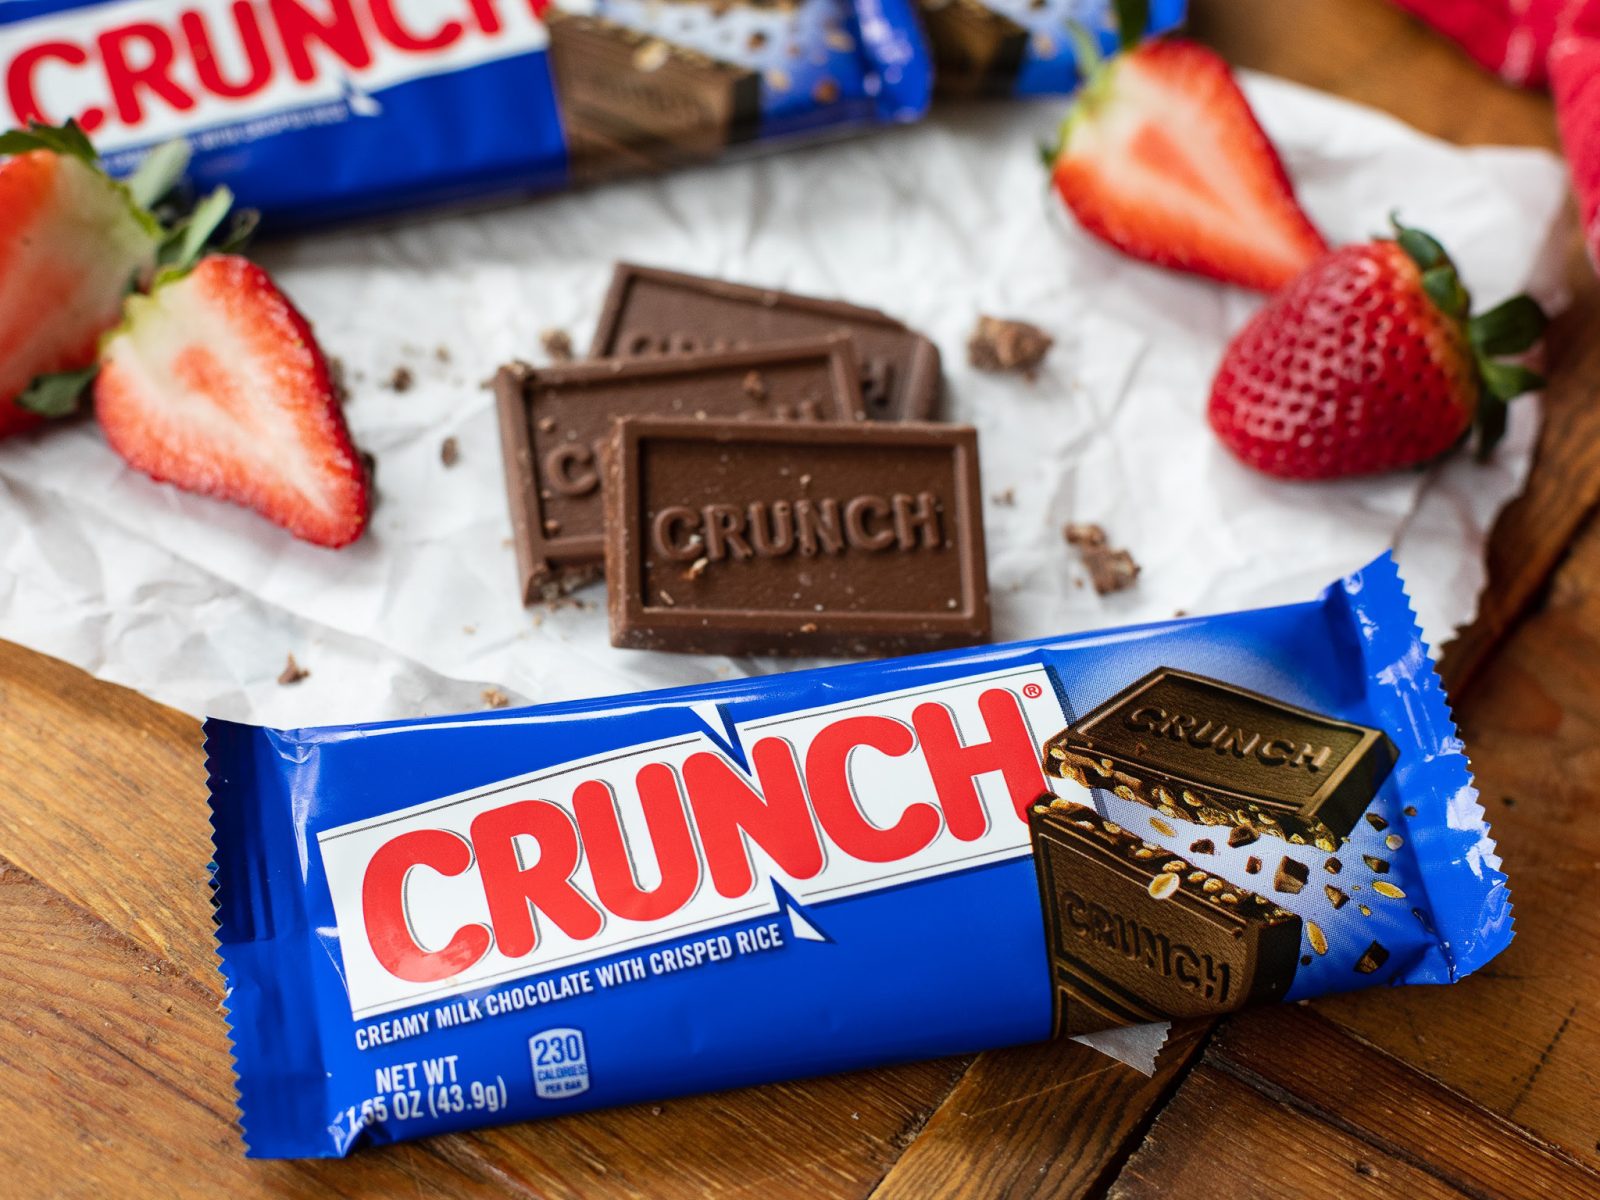 Grab Nestle Crunch Chocolate Bars For Just 67¢ At Kroger